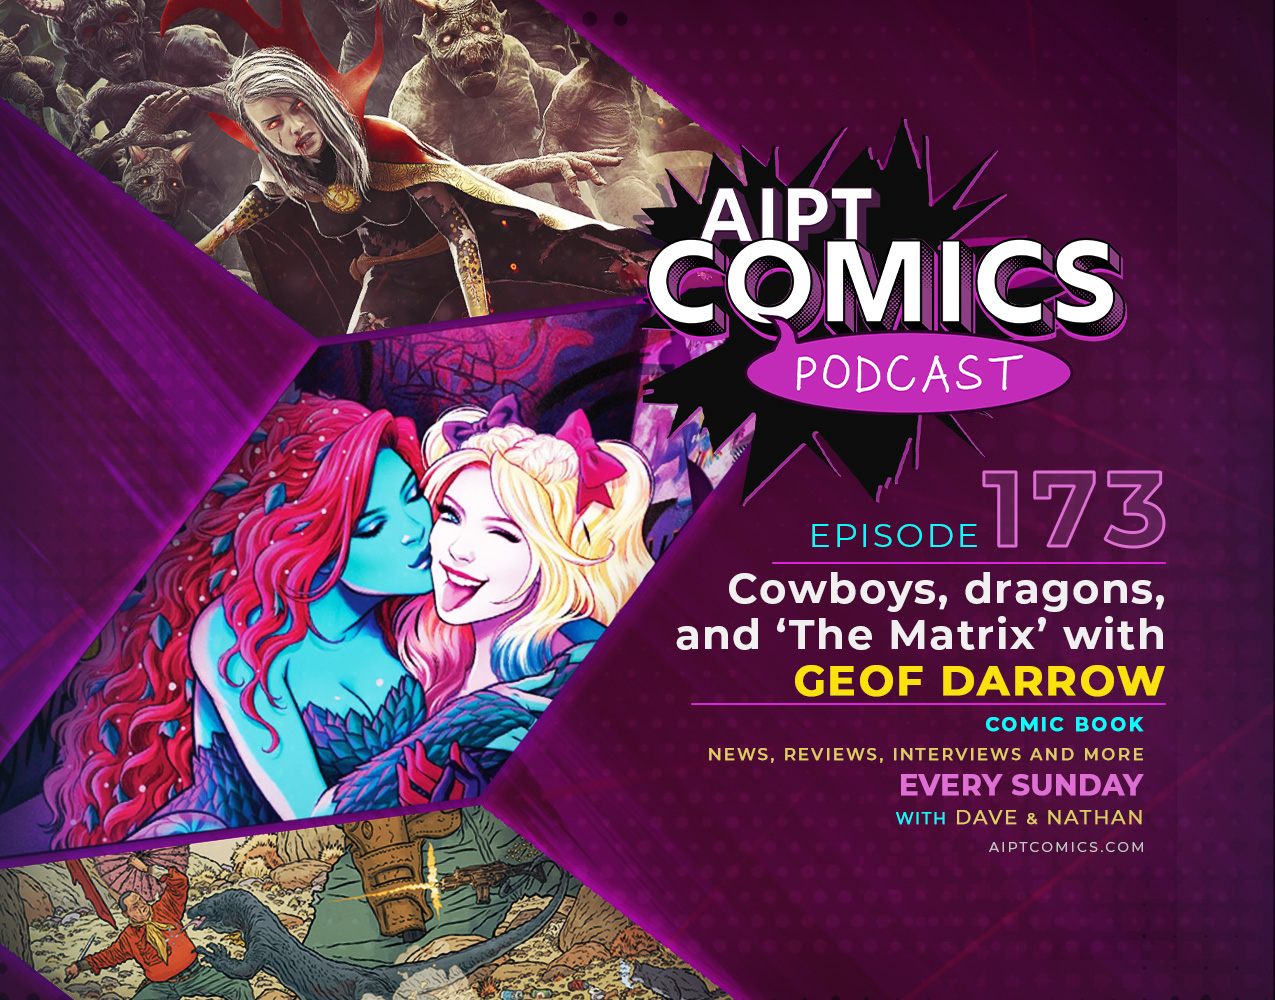 AIPT Comics podcast episode 173: Cowboys, dragons, and 'The Matrix' with Geof Darrow